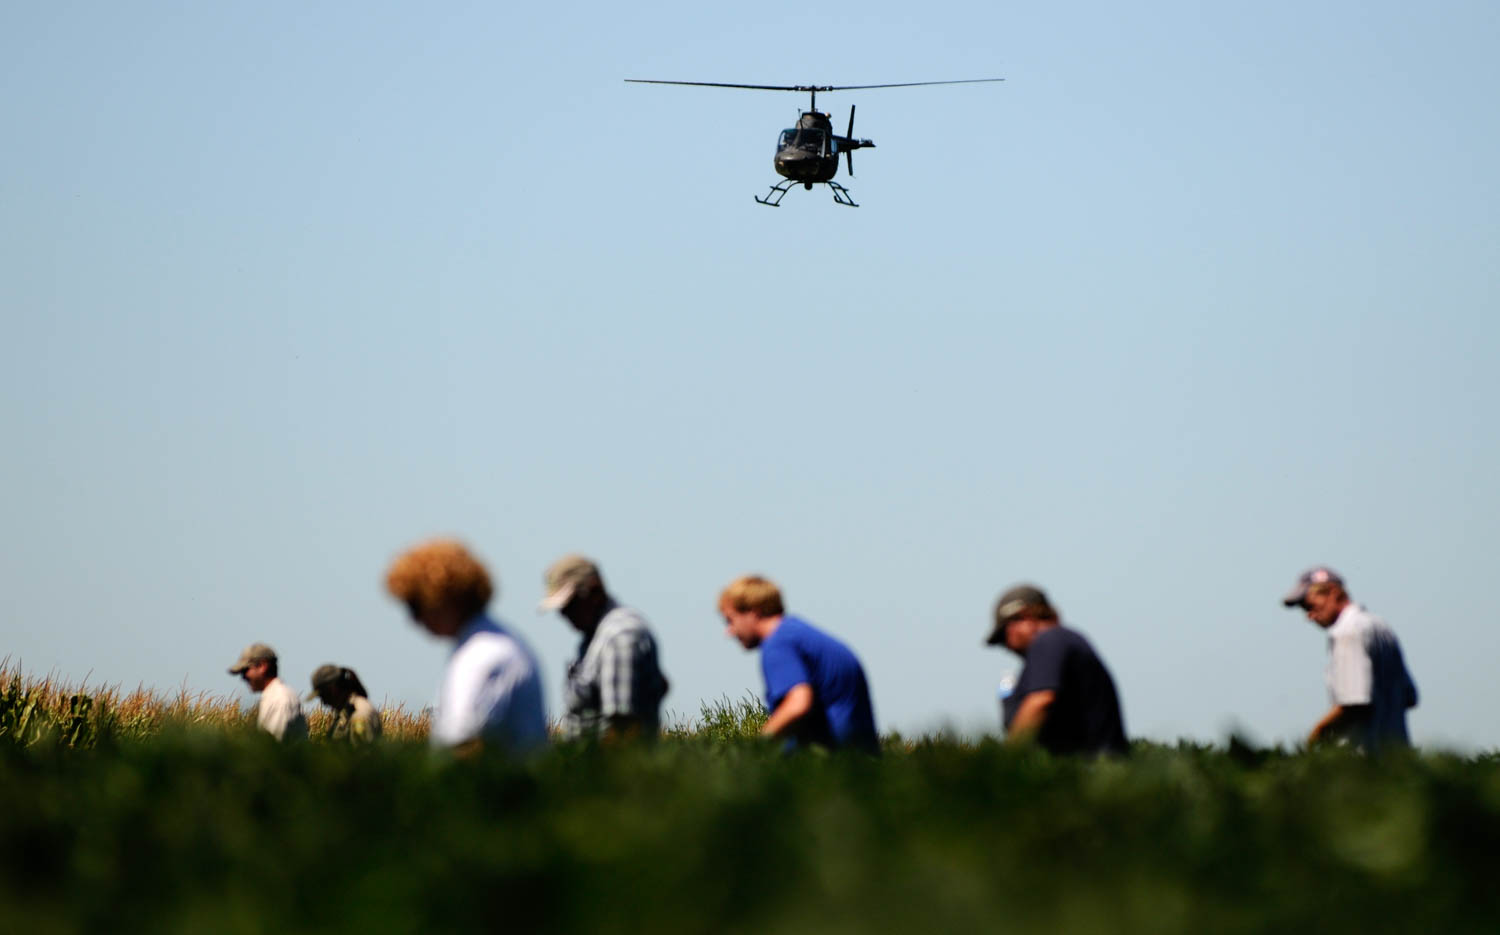 While helicopter searches from above volunteers and law enforcement search the soybean field north of the house where a 2-year-old boy went missing from on Monday August 6, 2012. The little boy was reported missing shortly after 10:30 a.m. this morning, he was found after being lost for hours in a farm field. According to Jeff Dale, chief deputy of the Mercer County Sheriff's Office, the boy was found uninjured three-quarters of a mile northwest of the home. (Todd Mizener - Dispatch/Argus)